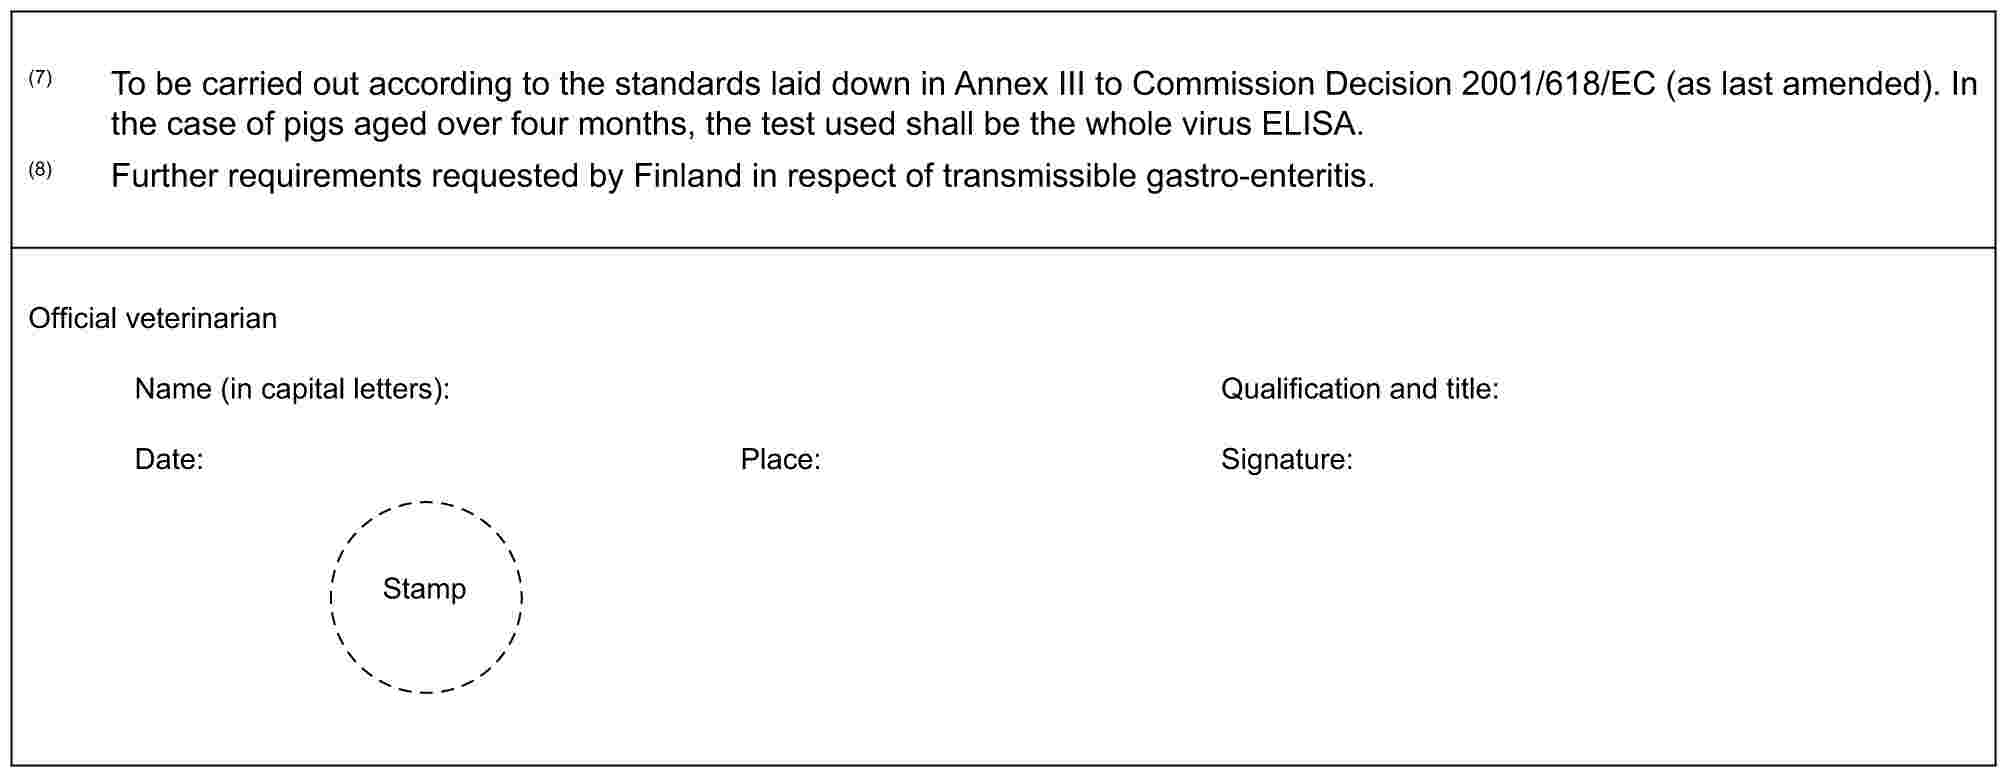 (7) To be carried out according to the standards laid down in Annex III to Commission Decision 2001/618/EC (as last amended). In the case of pigs aged over four months, the test used shall be the whole virus ELISA.(8) Further requirements requested by Finland in respect of transmissible gastro-enteritis.Official veterinarianName (in capital letters): Qualification and title:Date: Place: Signature:Stamp